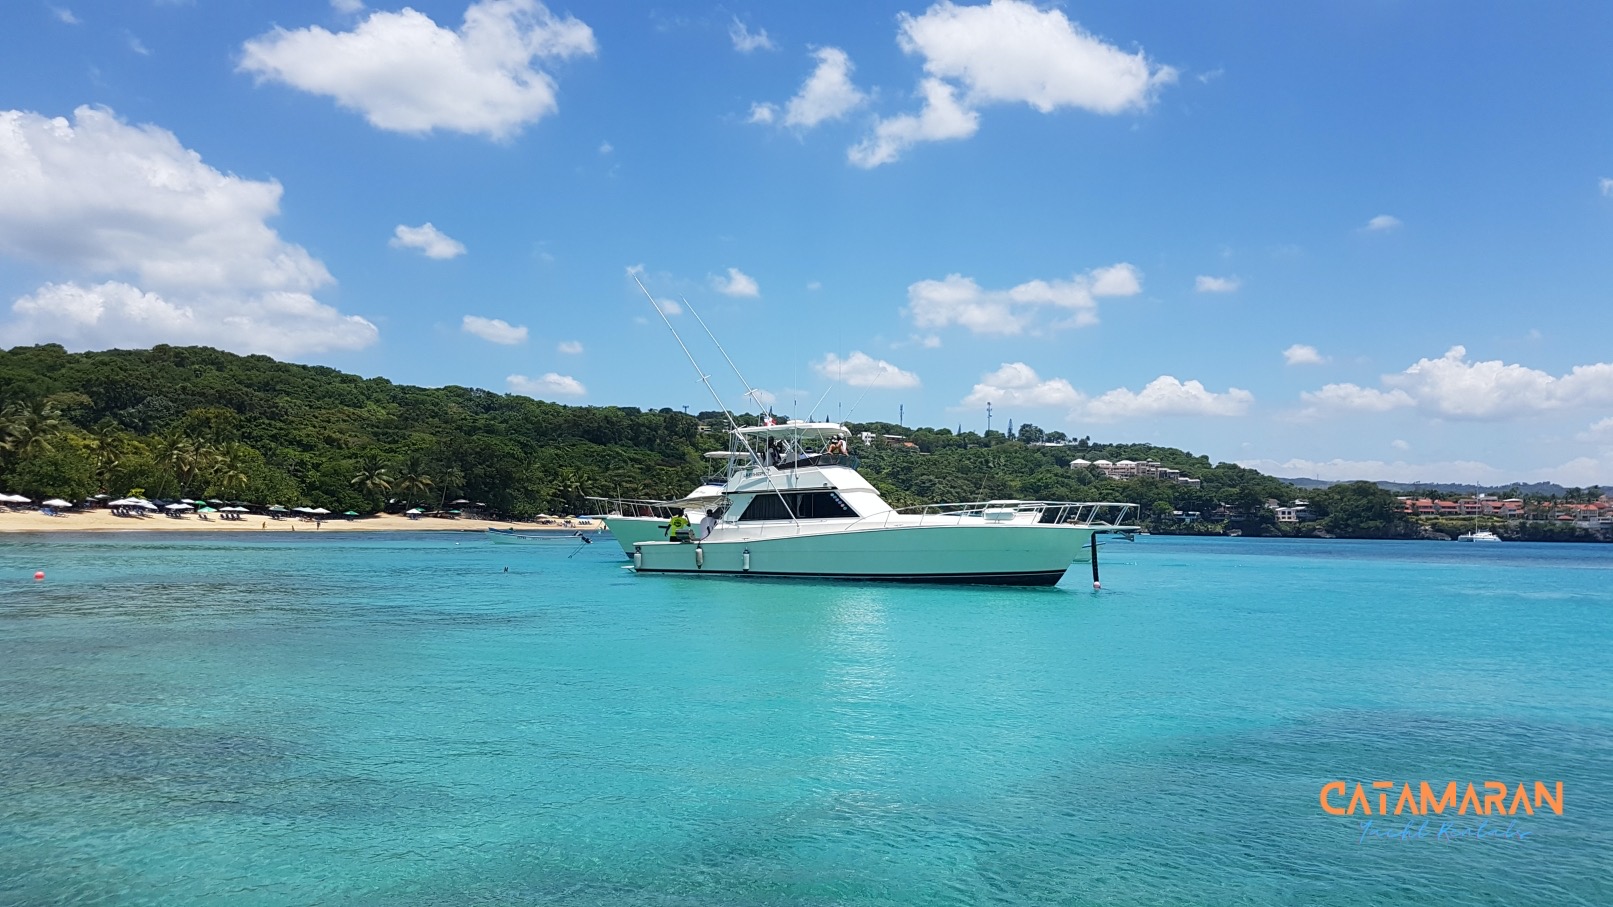 View of the yacht in Sosua beach.